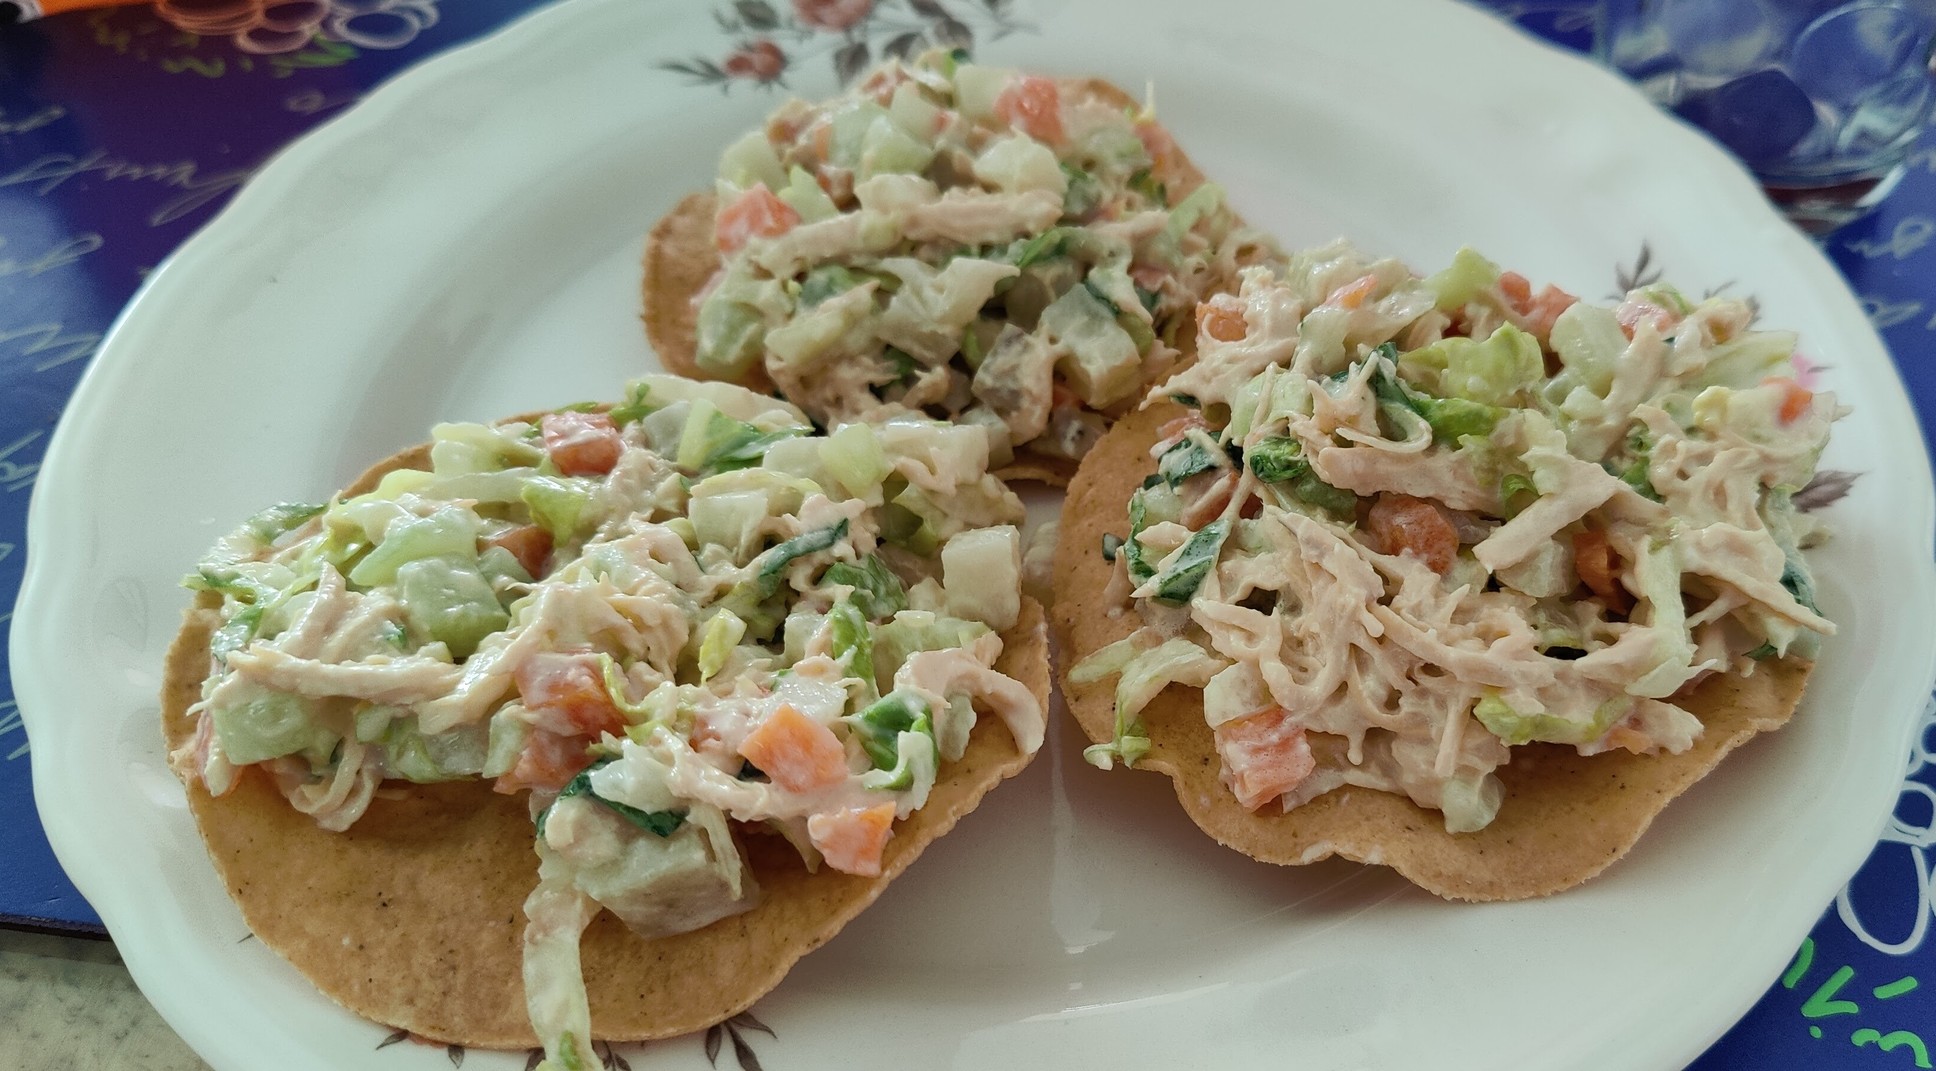 3 salad’s tostadas on top of a white dish. The salad has a mixed texture and colorful white-ish aspect due to the chopped vegetables and the creme.